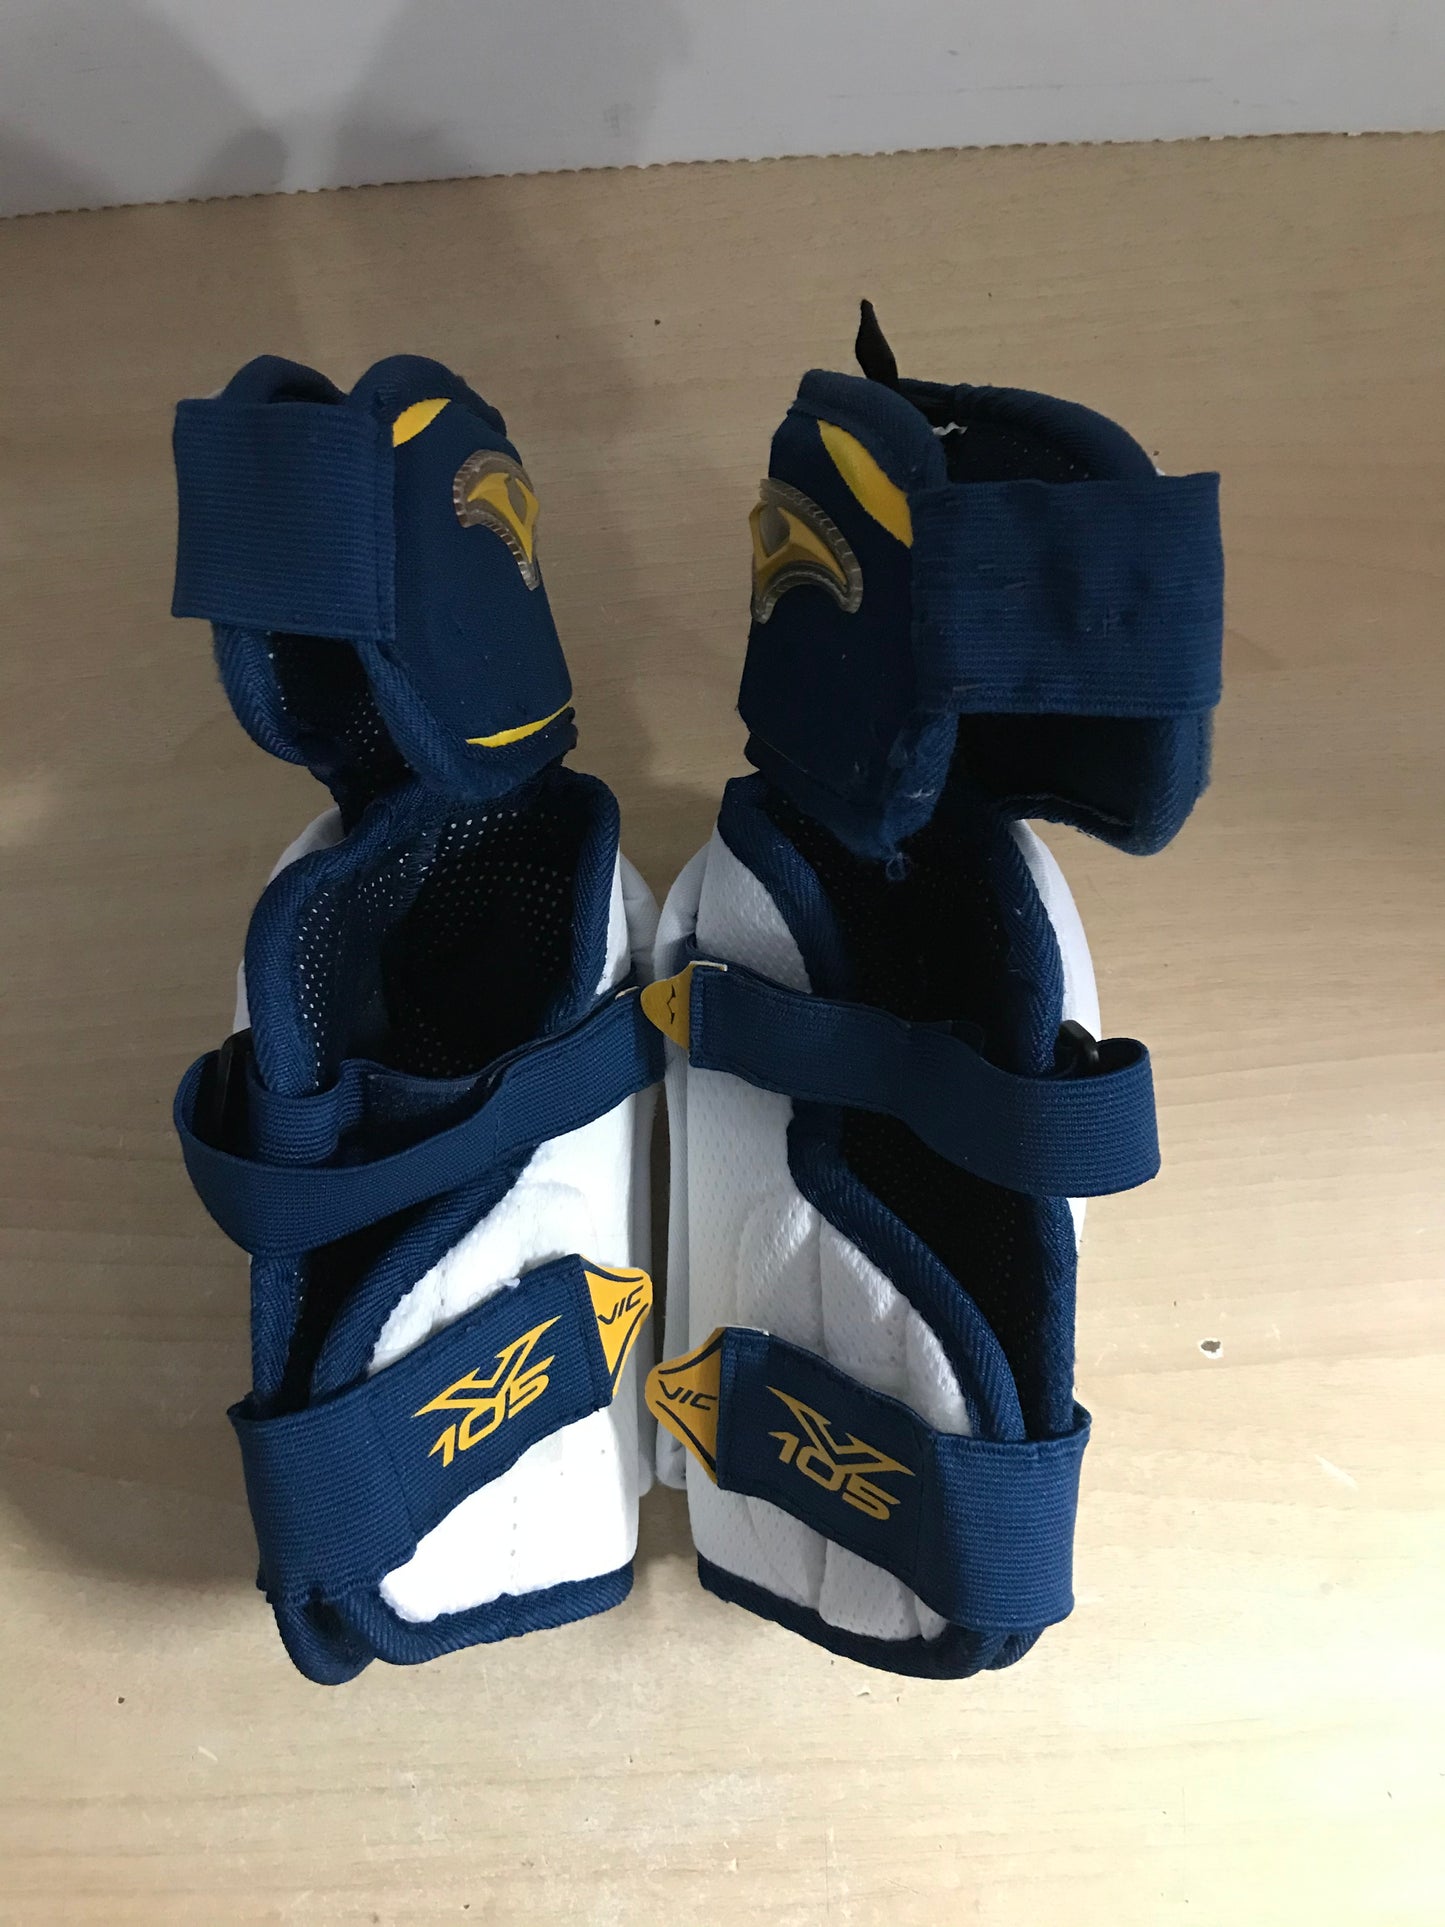 Hockey Elbow Pads Men's Size Small Vic Blue White Yellow Excellent